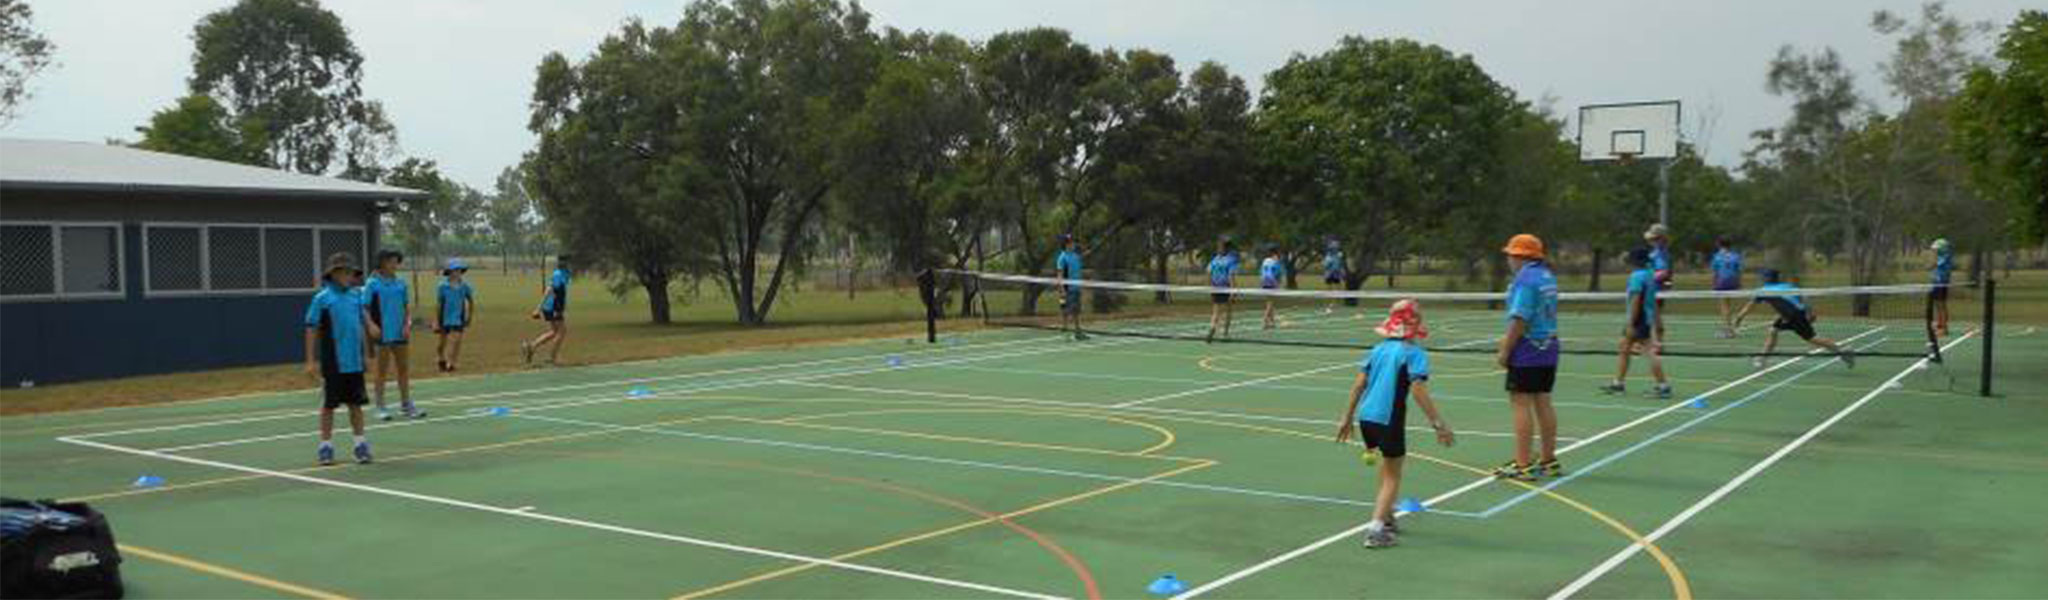 Students playing on a tennis court